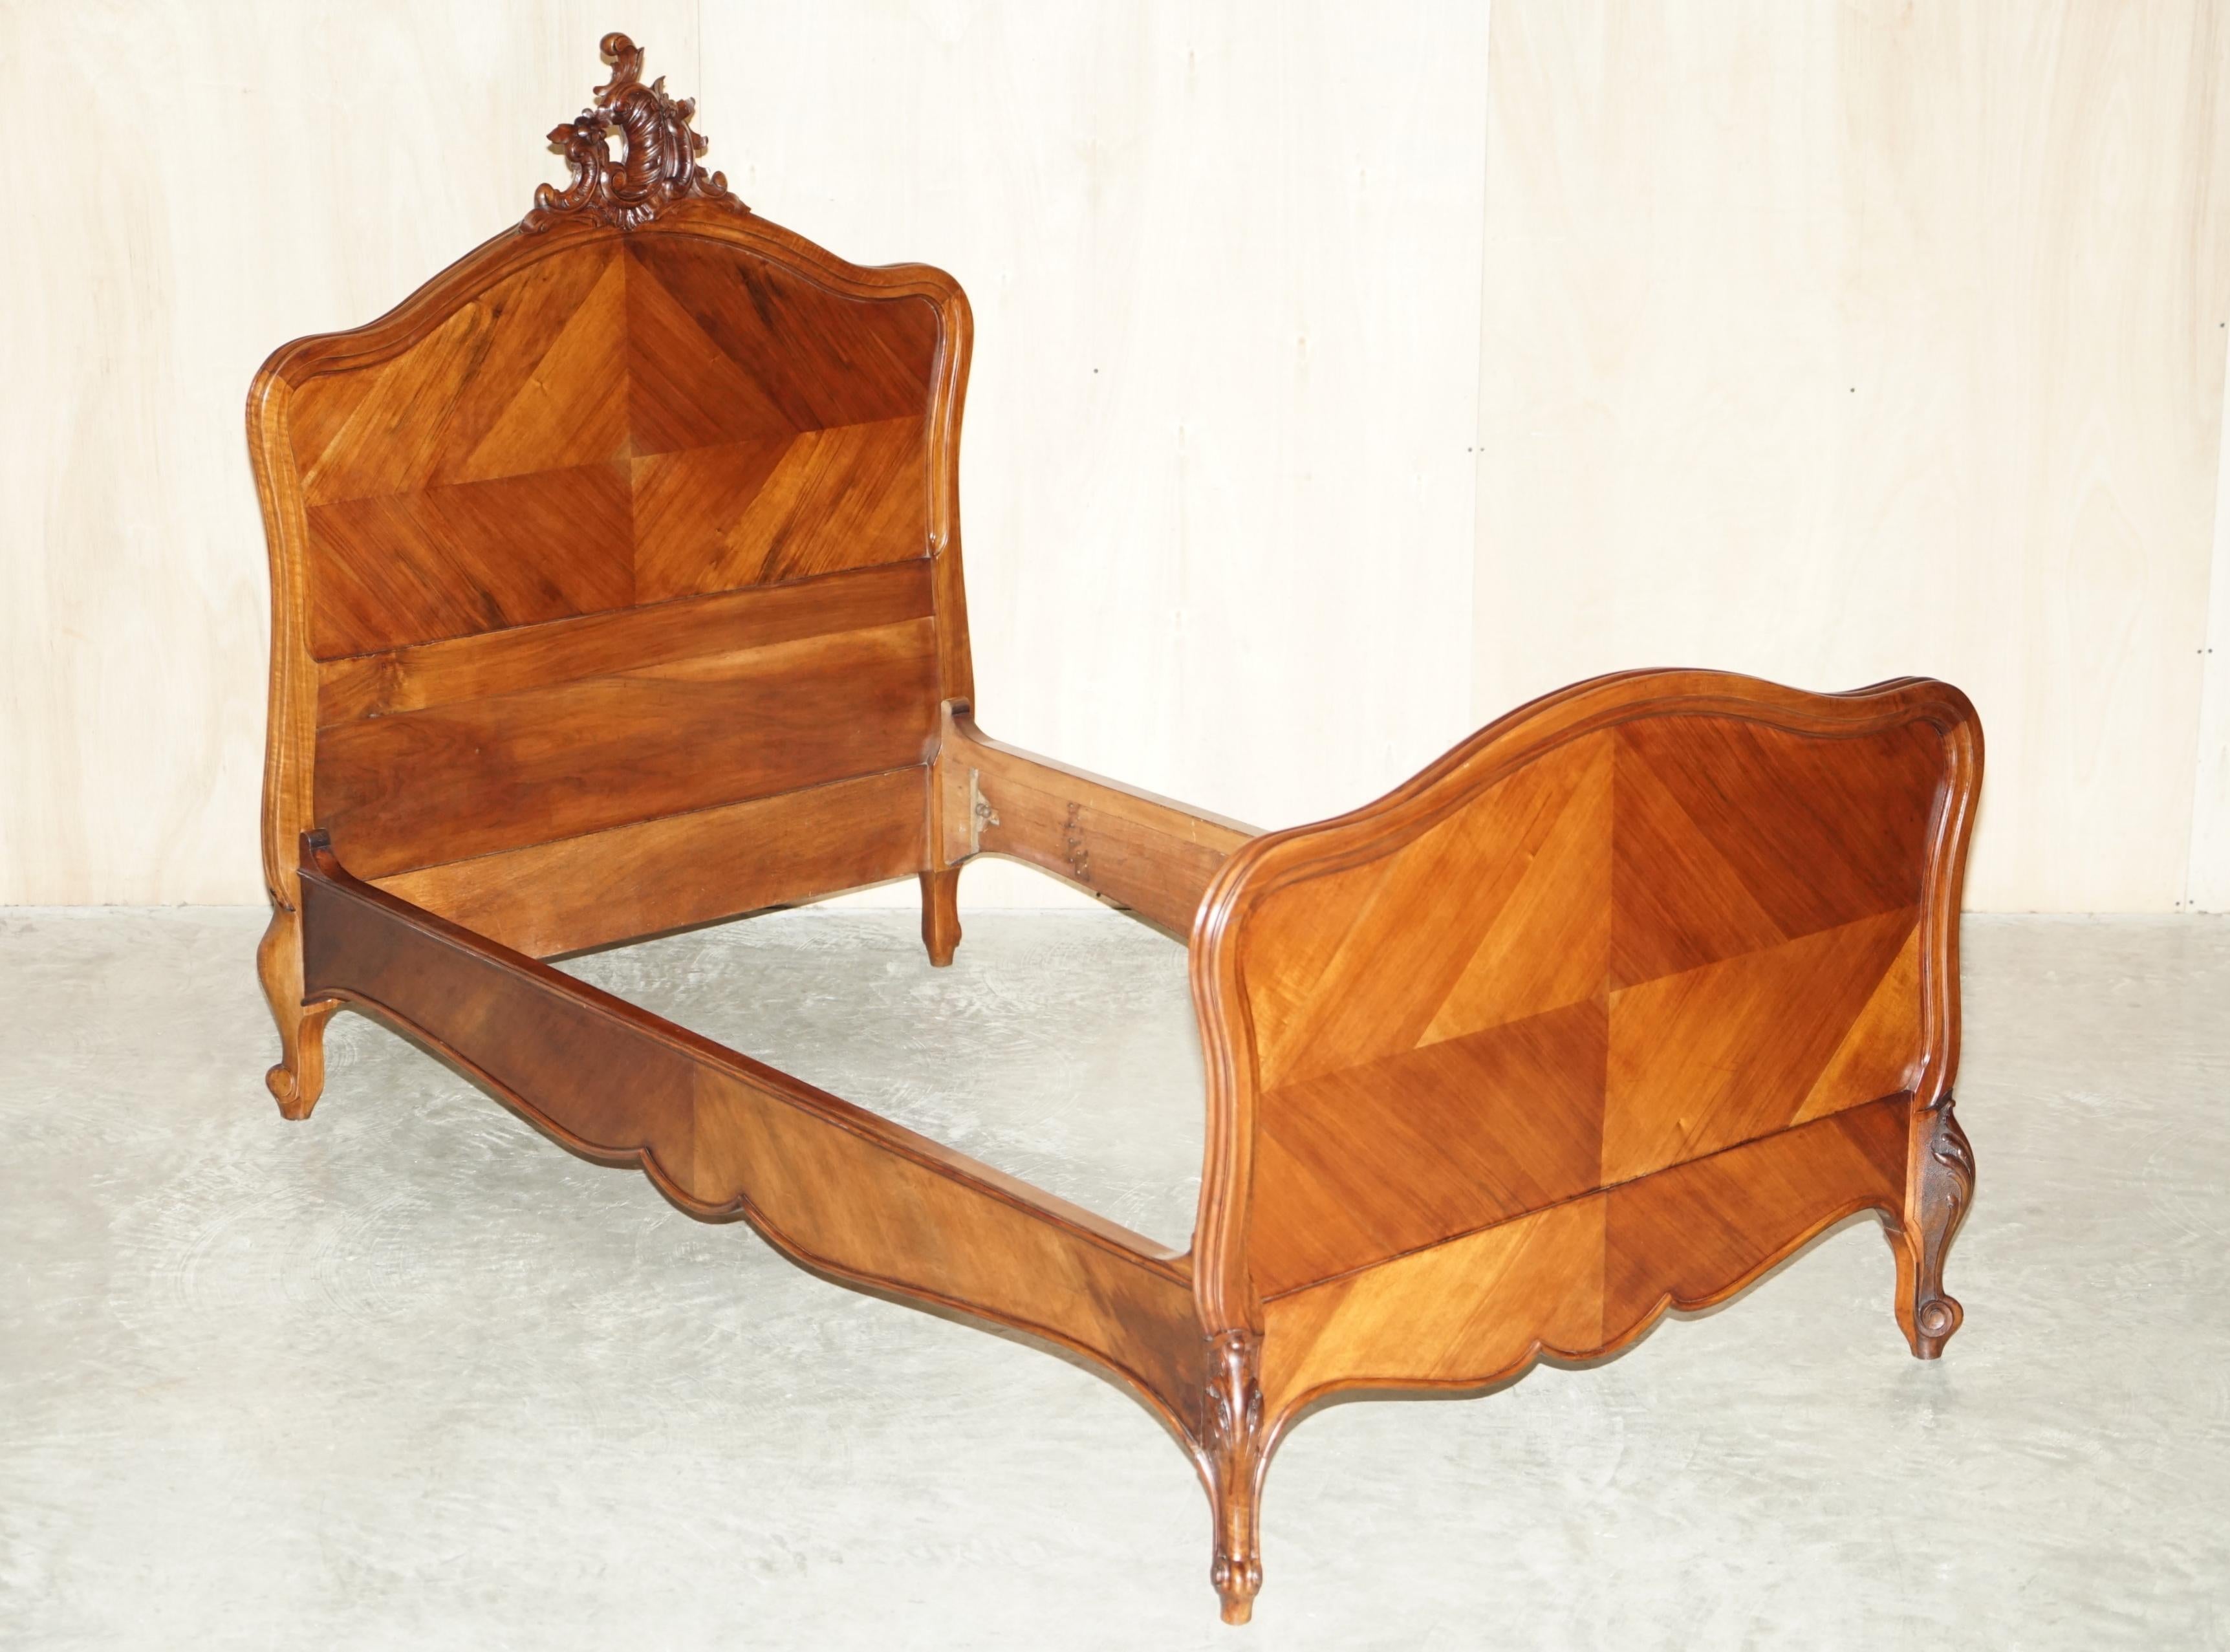 We are delighted to offer for sale this stunning pair of circa 1880 Louis XV Style, Napoleon III hand carved walnut bed frames 

A lovely pair of original hand made in France, Walnut bed frames. The timber grain and colour is sublime, they look